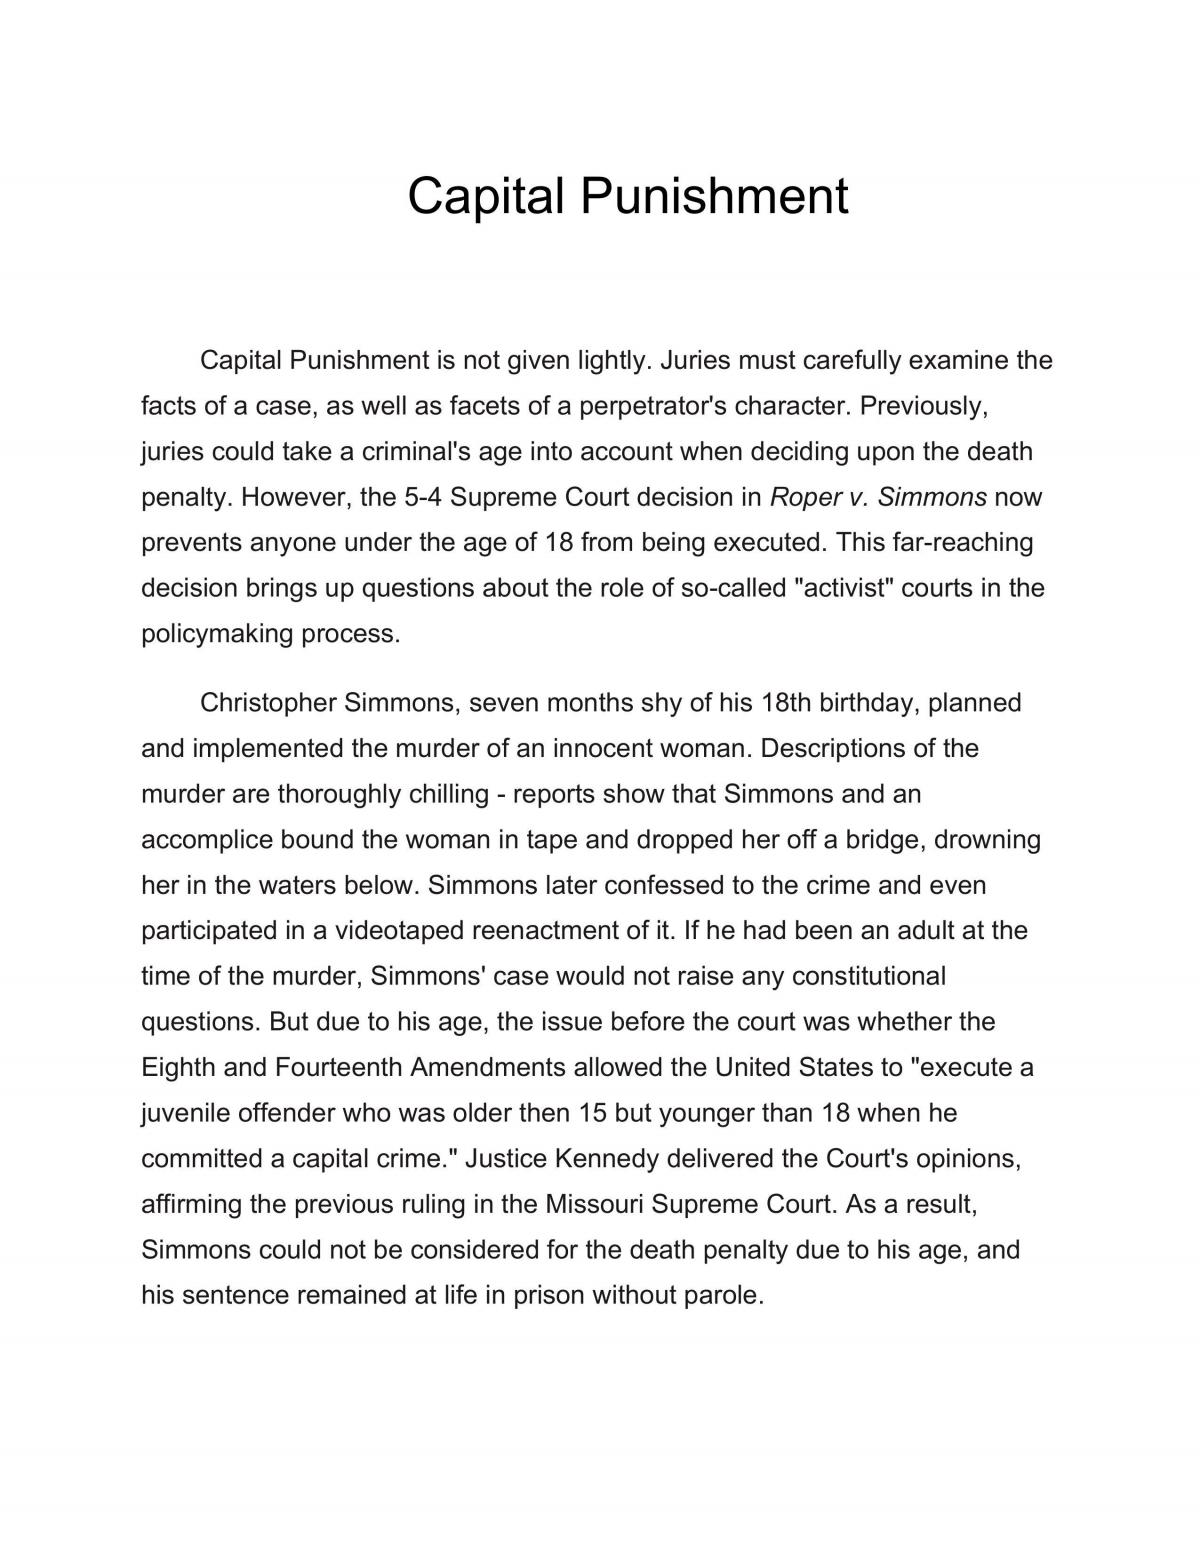 literature review on capital punishment